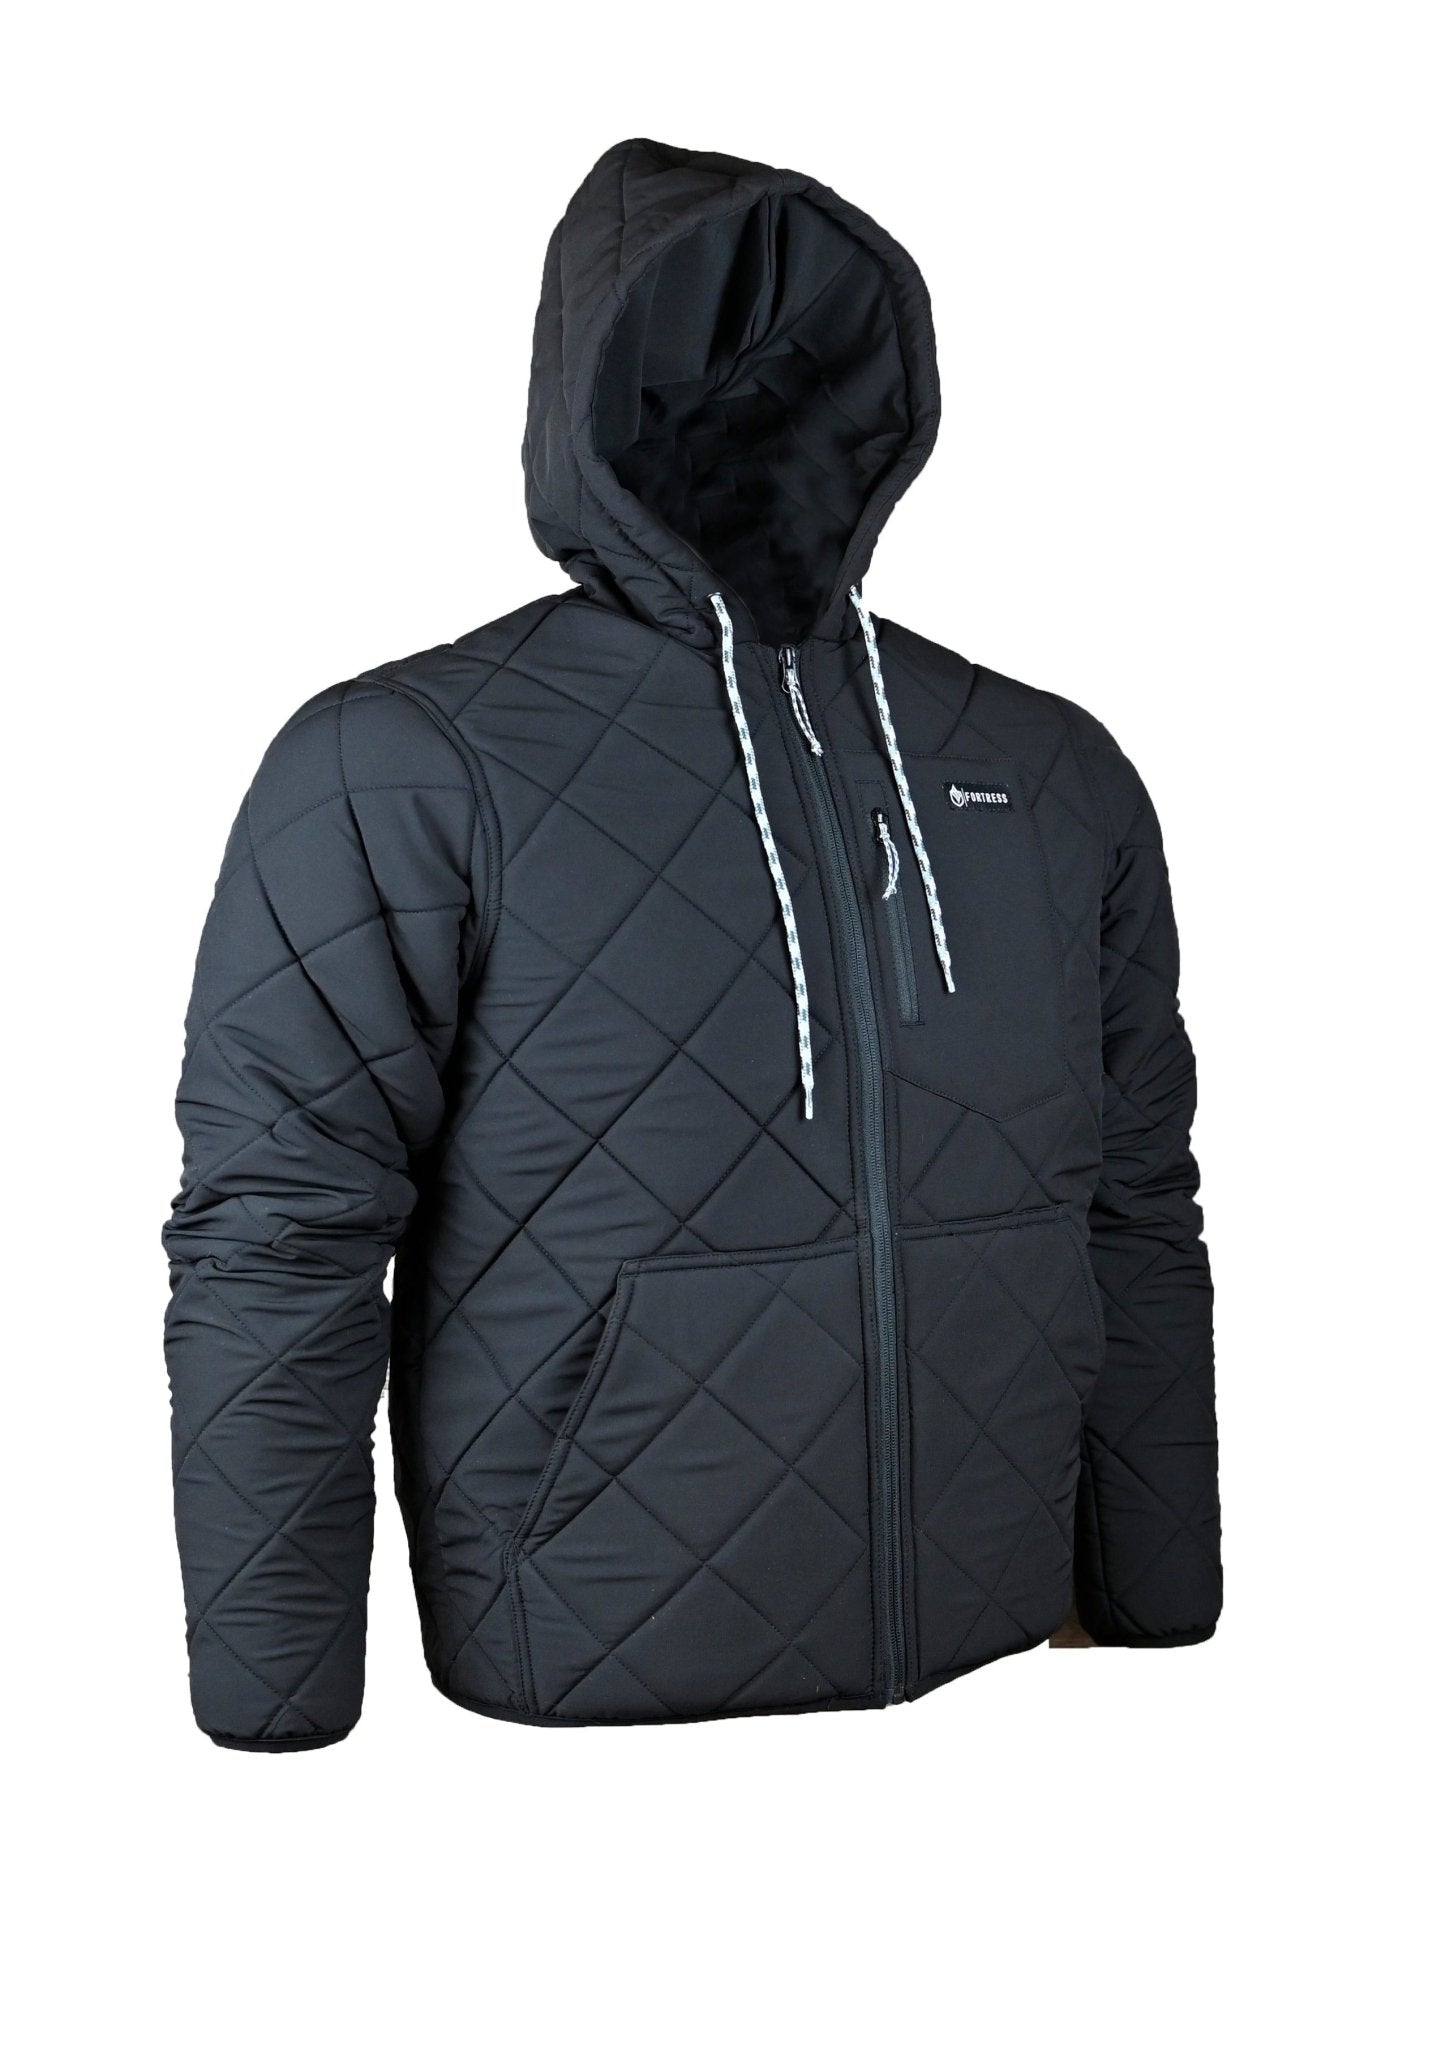 Stay Warm and Stylish with Fortress Winter Clothing - Shop Now!